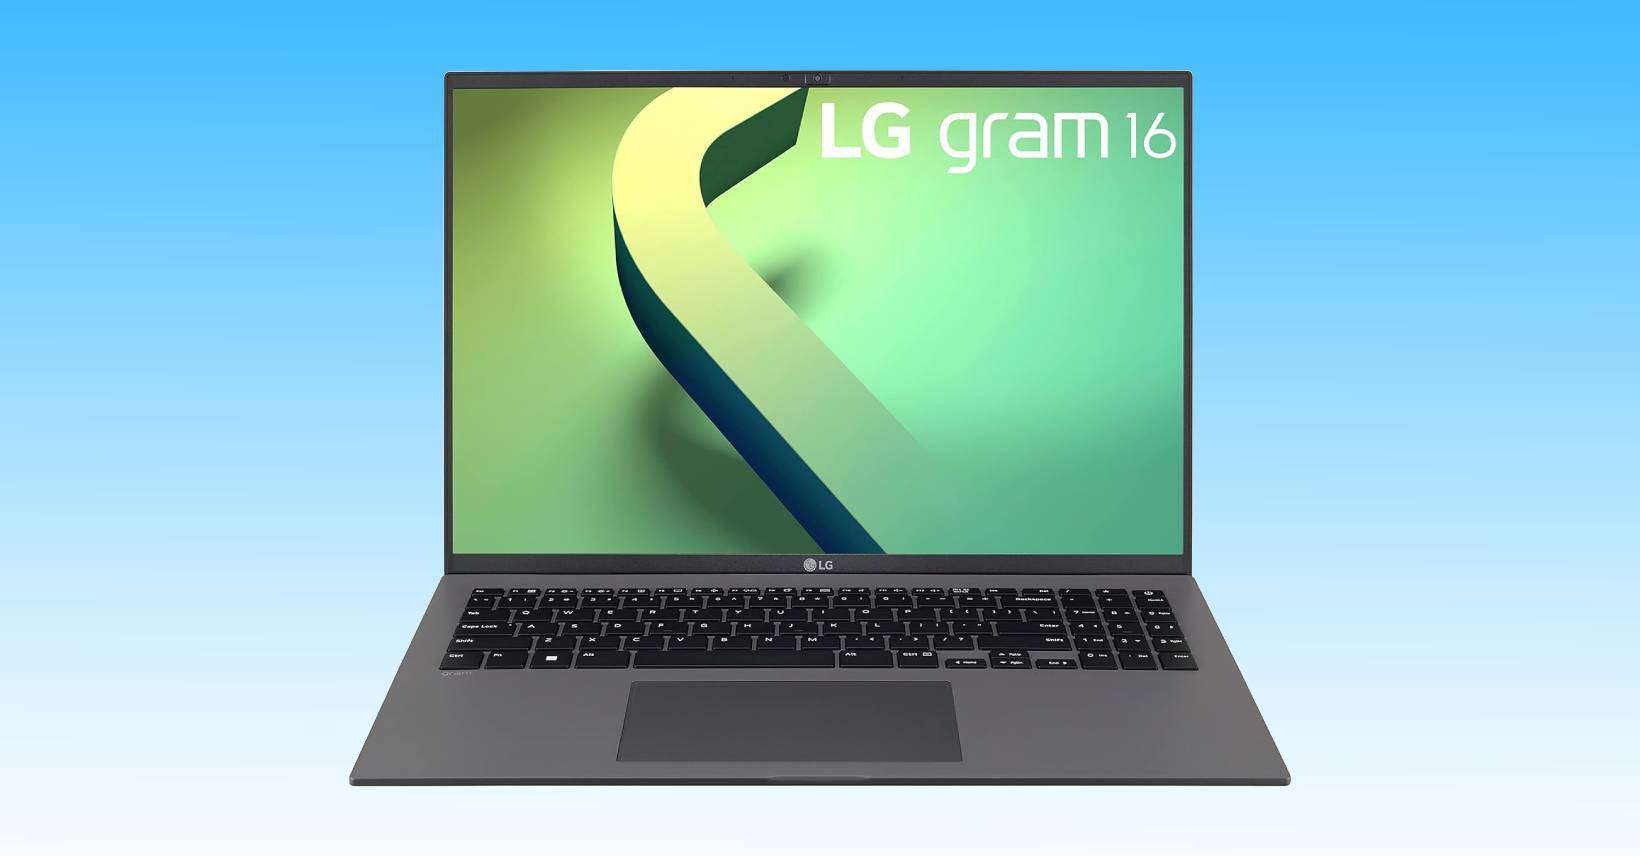 The LG gram 6 laptop is shown on a blue background with an awesome Prime Day deal.